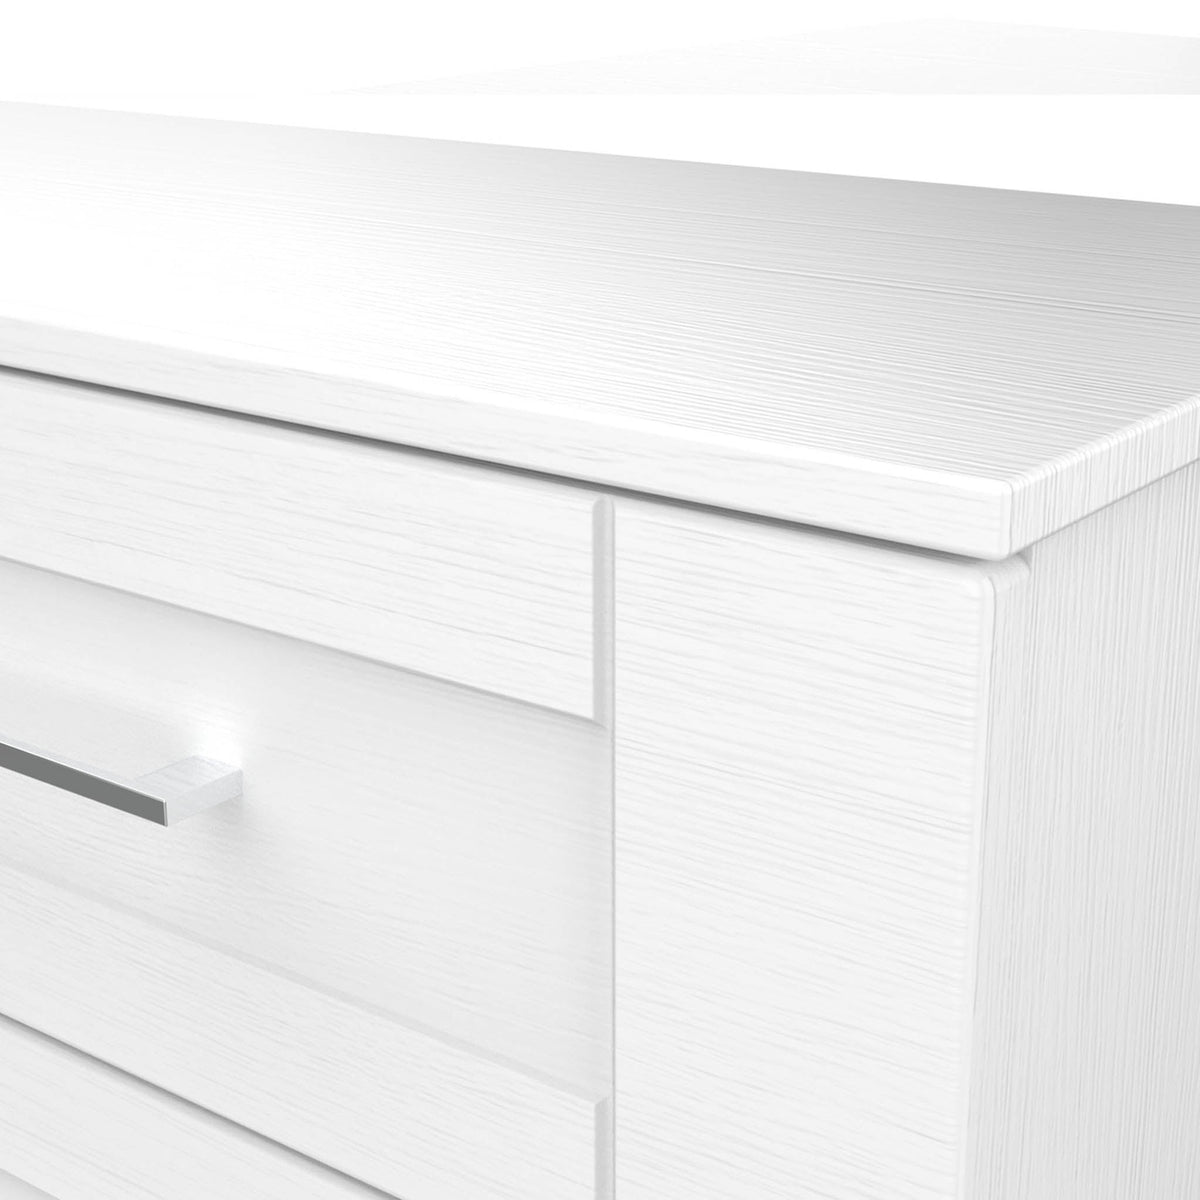 Bellamy White wireless charging 3 drawer bedside table wood grain close up